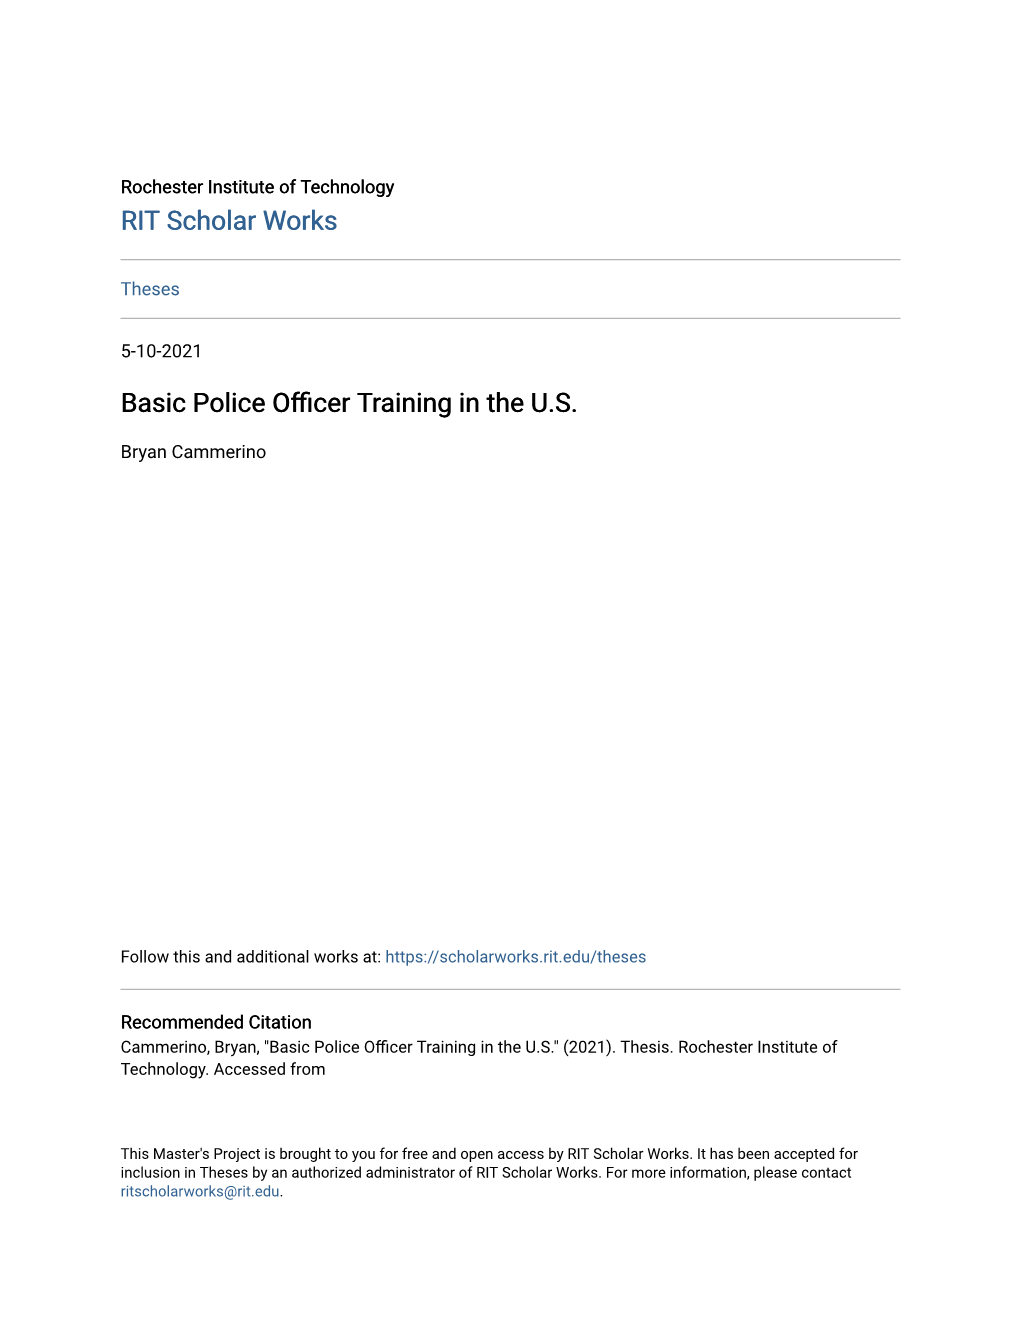 Basic Police Officer Training in the U.S